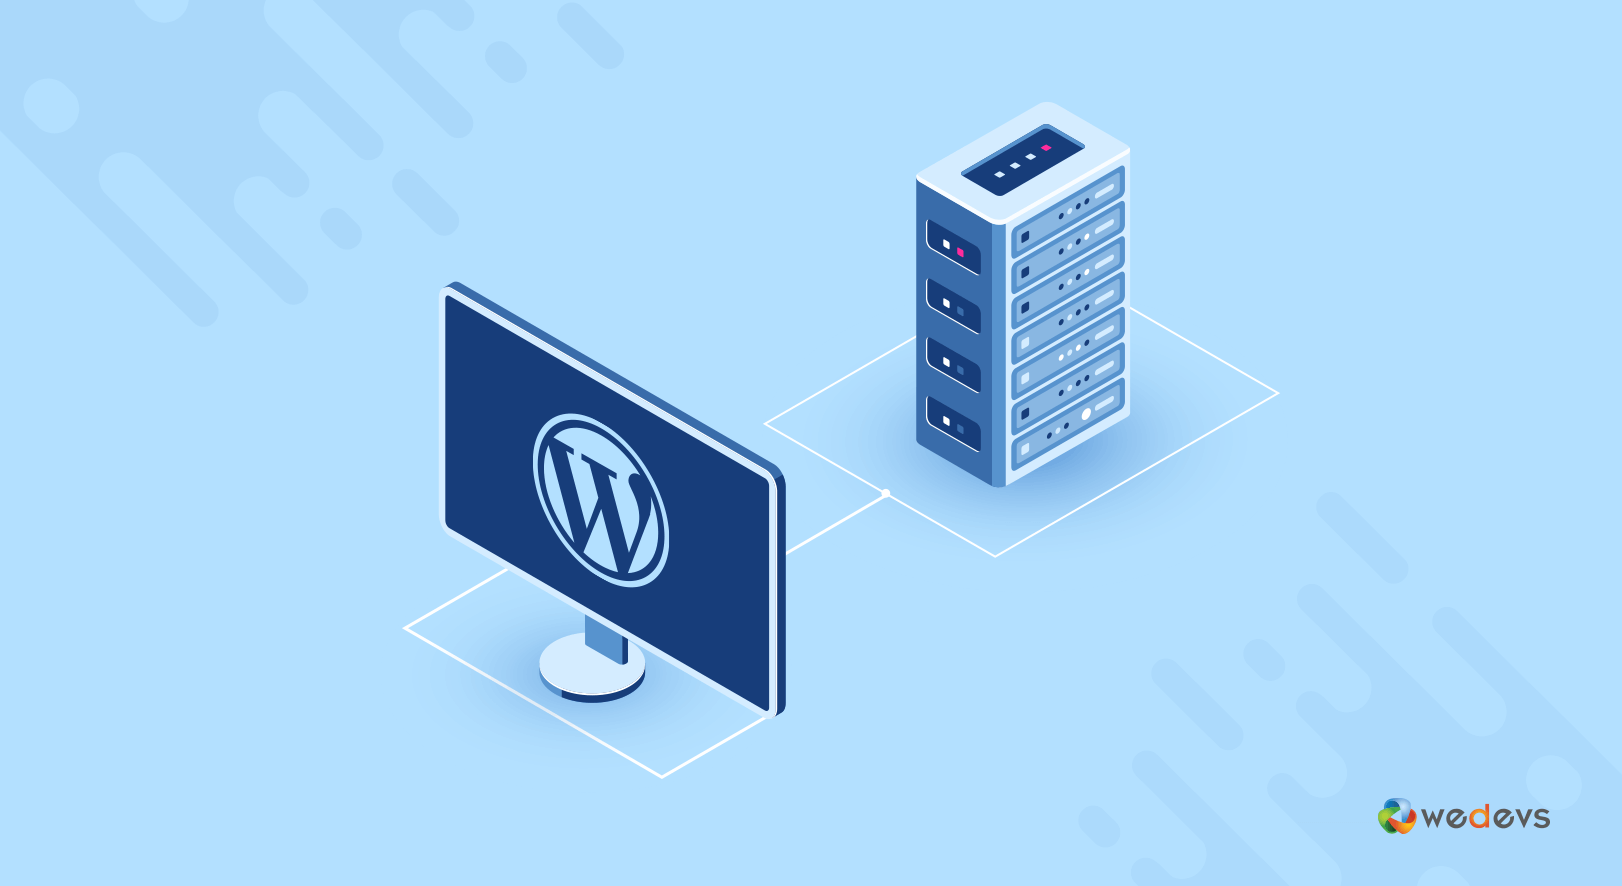 Domain and hosting can be the reason of WordPress website not displaying correctly